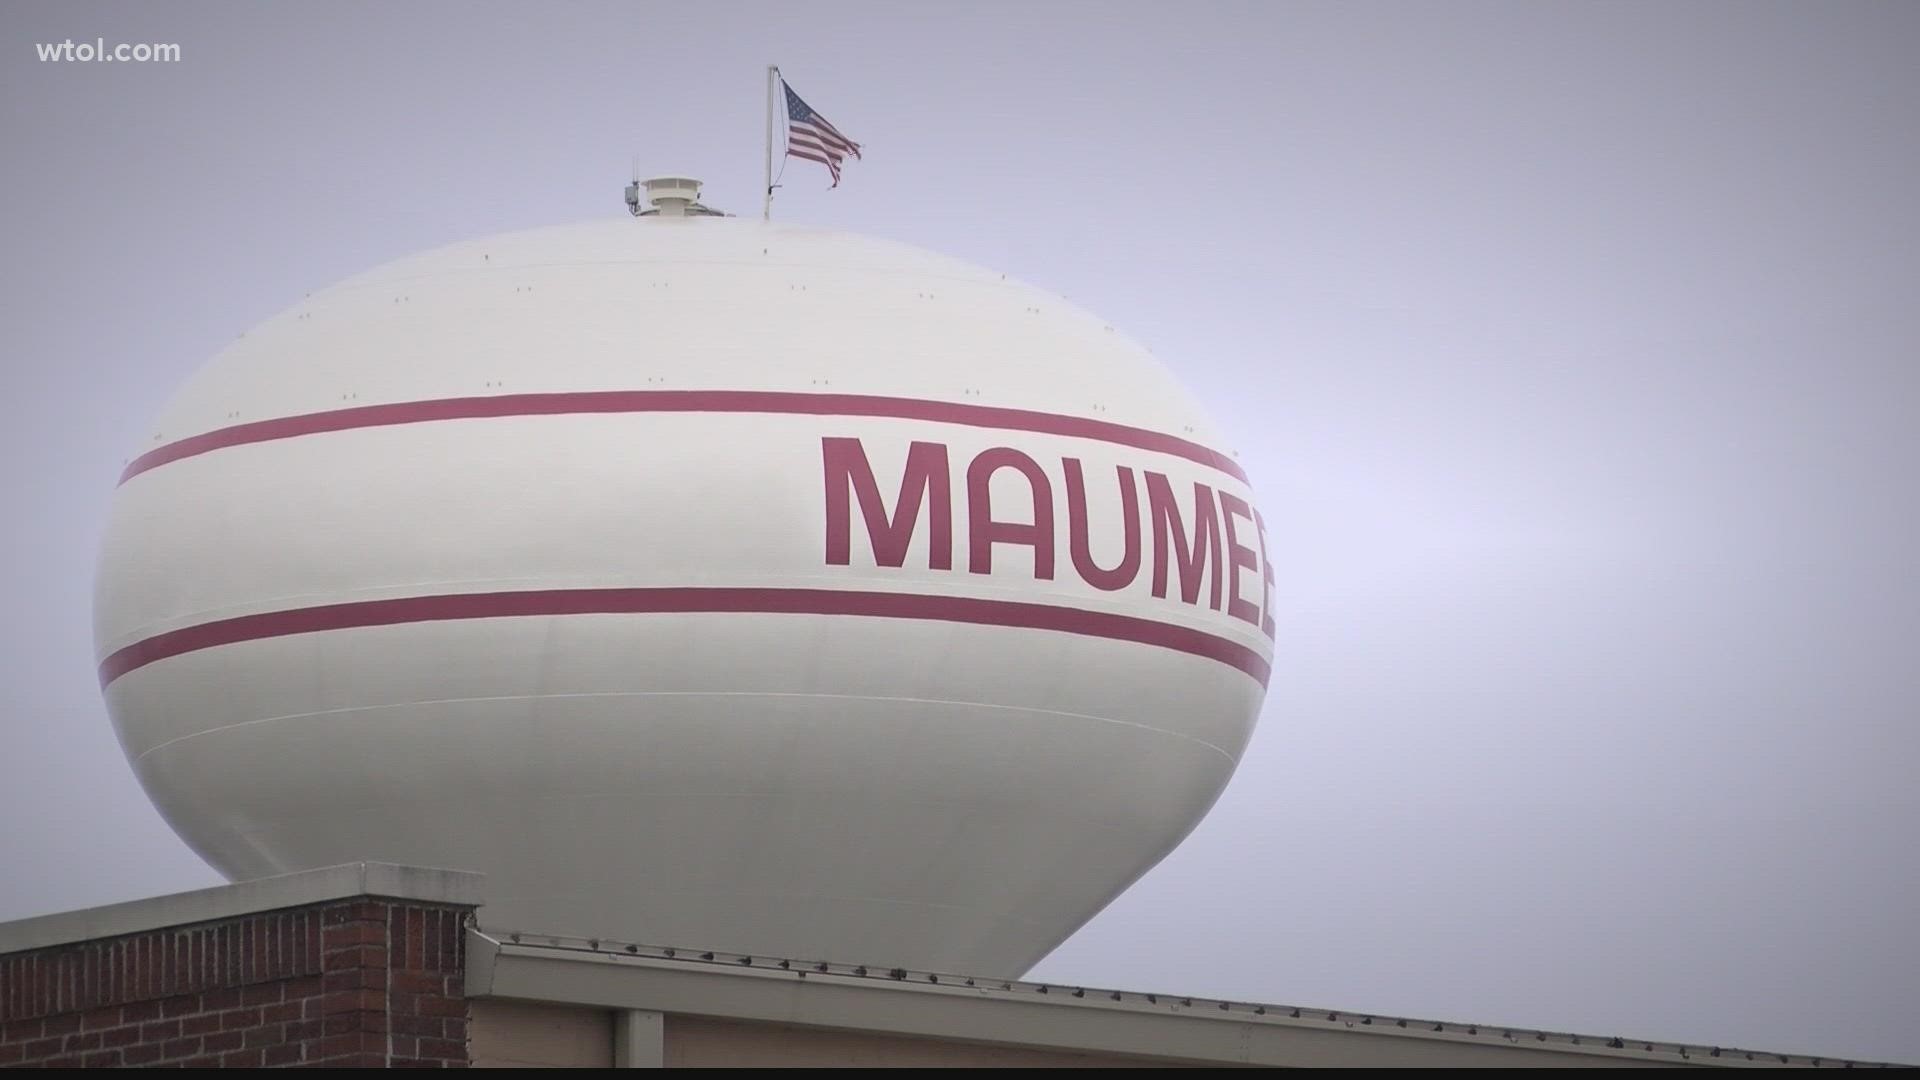 Lucas County commissioners said they are frustrated with the Ohio EPA and what they call a lack of transparency with problems in Maumee that led water bills to rise.